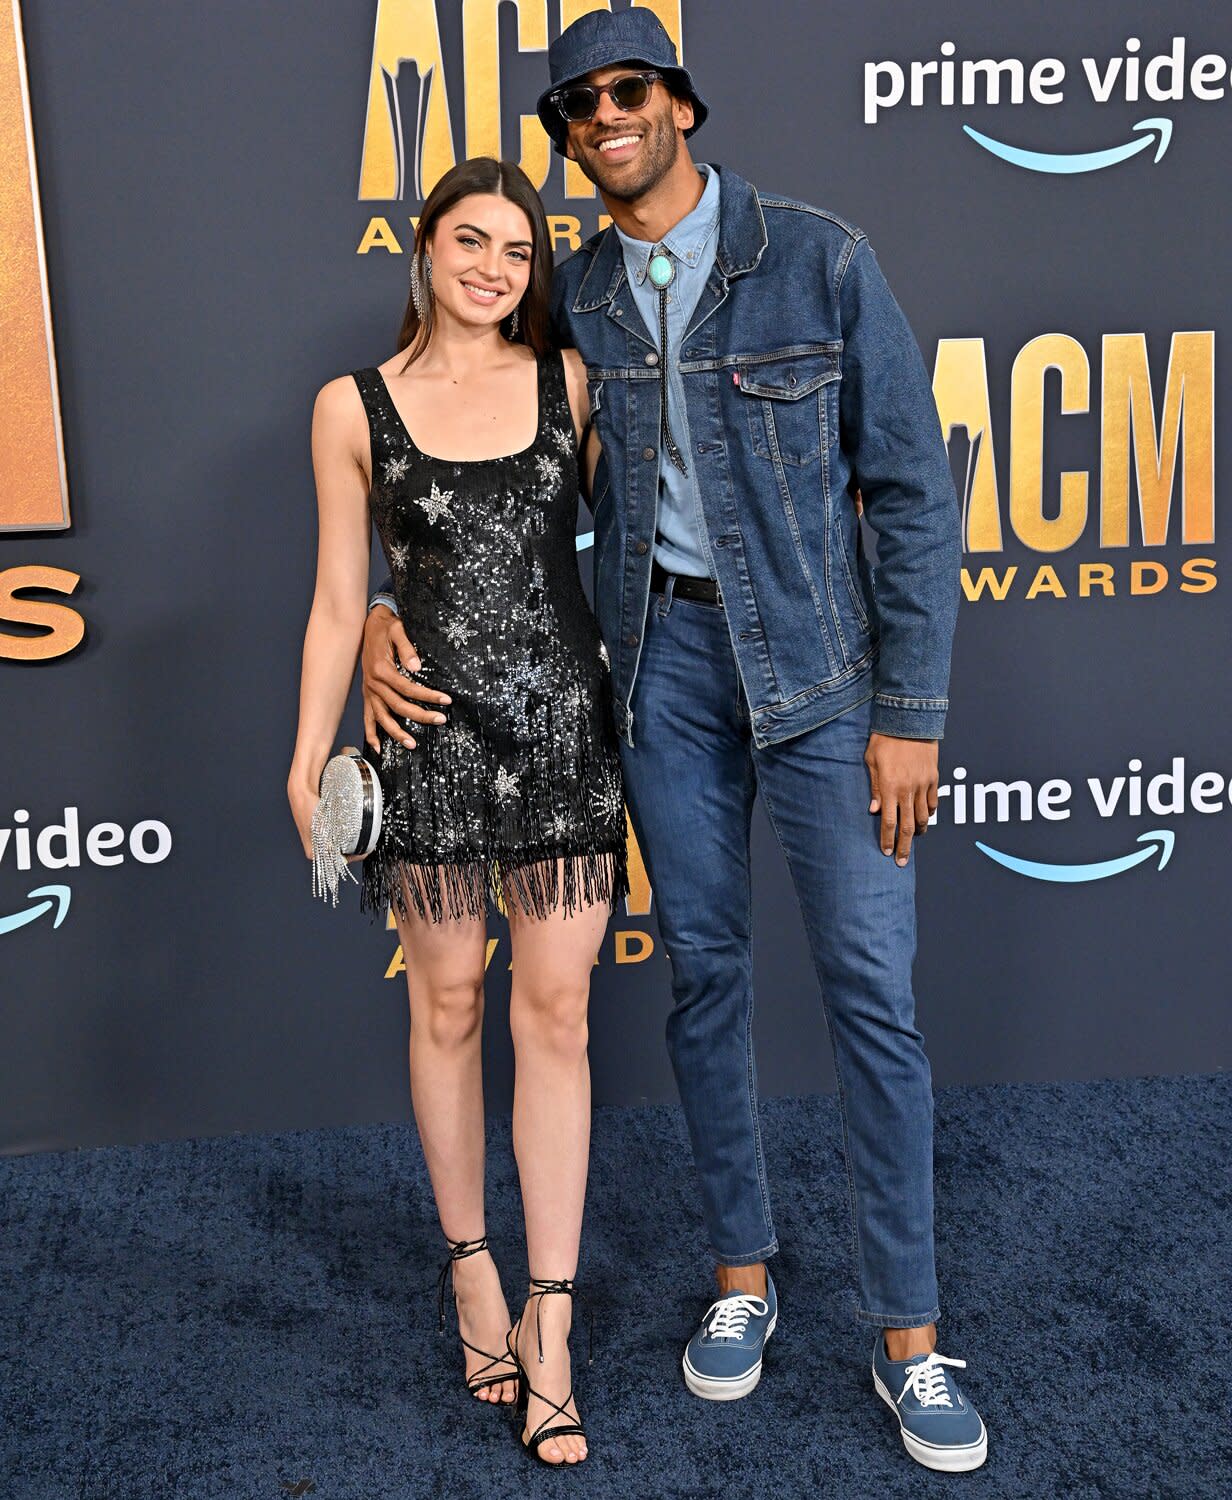 Rachael Kirkconnell and Matt James attend the 57th Academy of Country Music Awards on March 07, 2022 in Las Vegas, Nevada